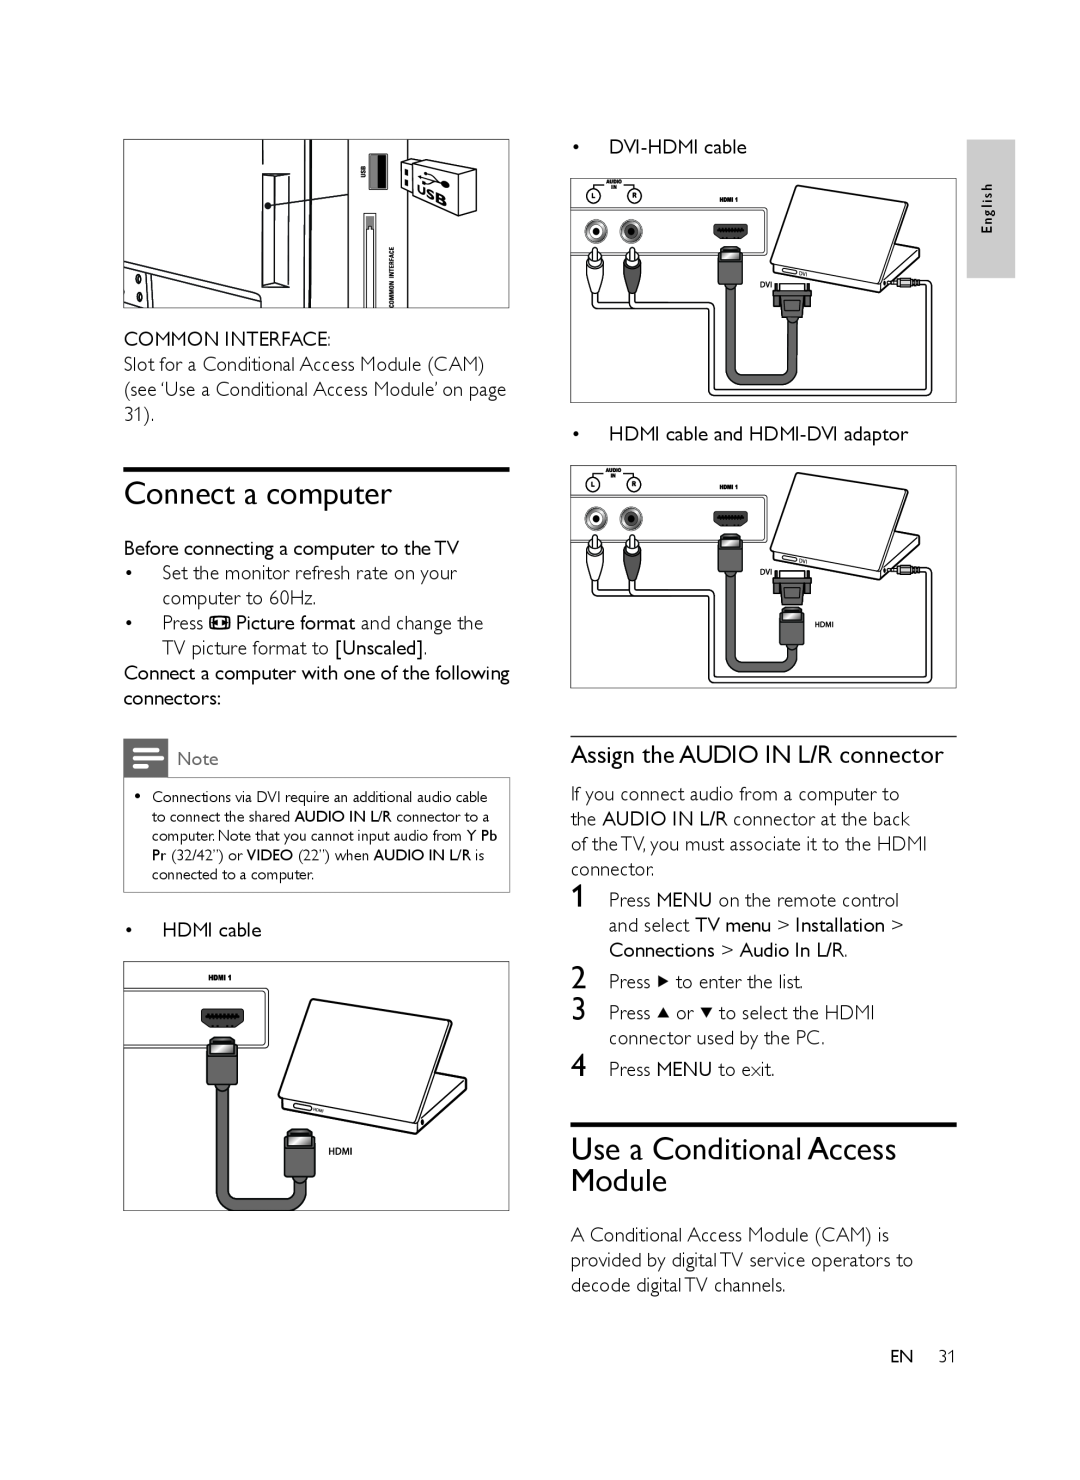 Philips 32PFL6403D/12 user manual Connect a computer, Use a Conditional Access Module, Assign the AUDIO IN L/R connector 